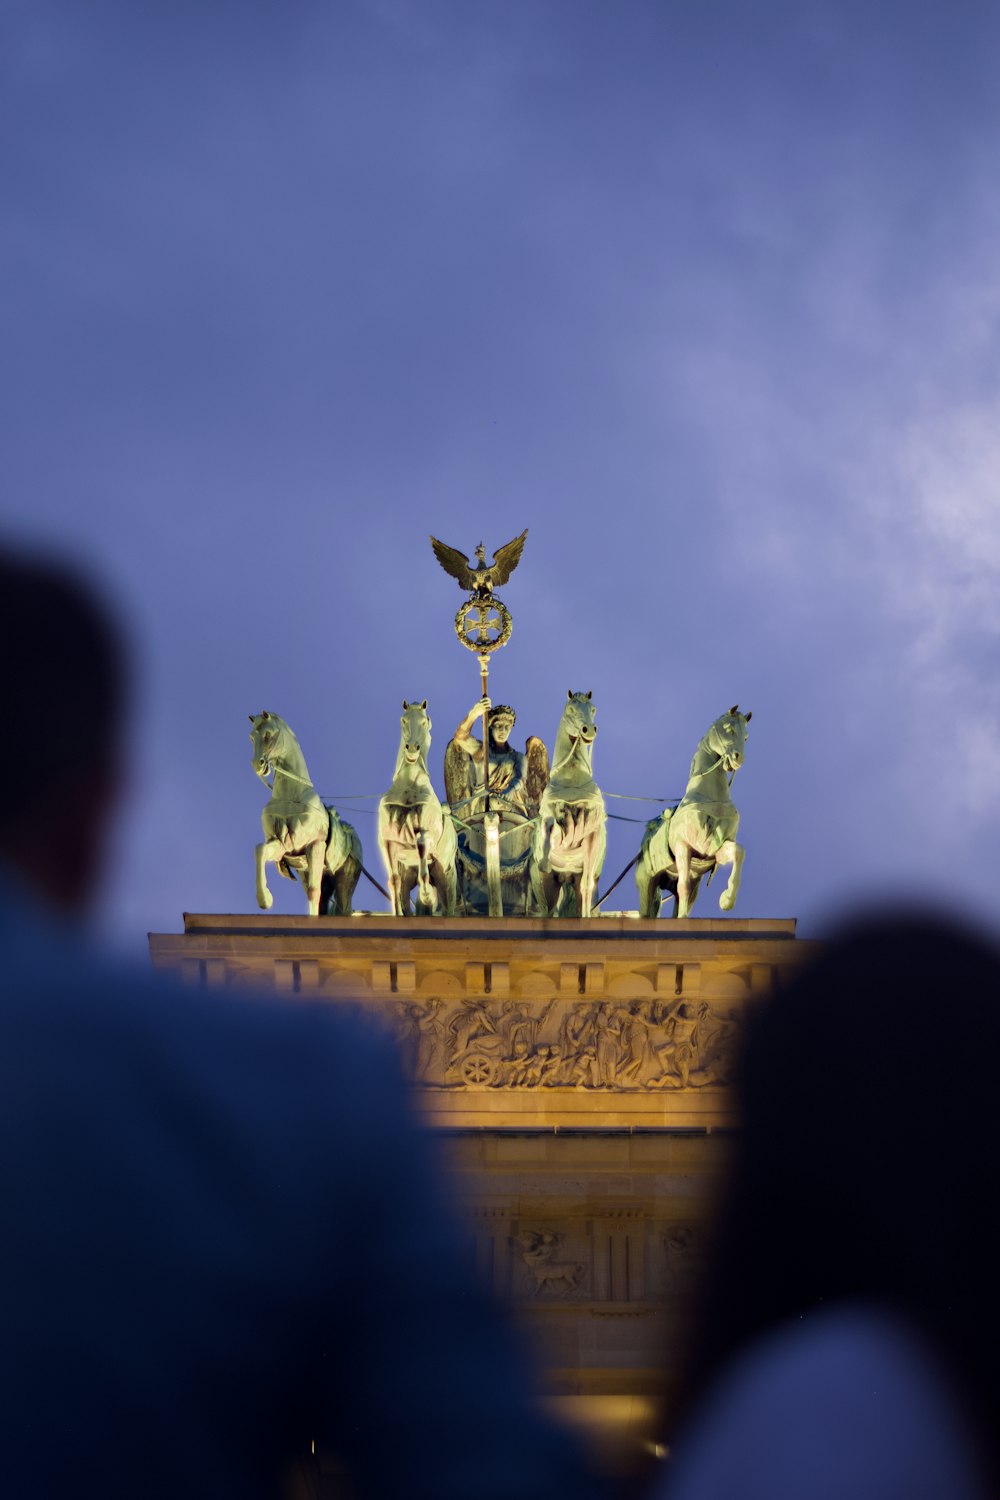 a statue of a group of people photo – Free Berlin Image on Unsplash